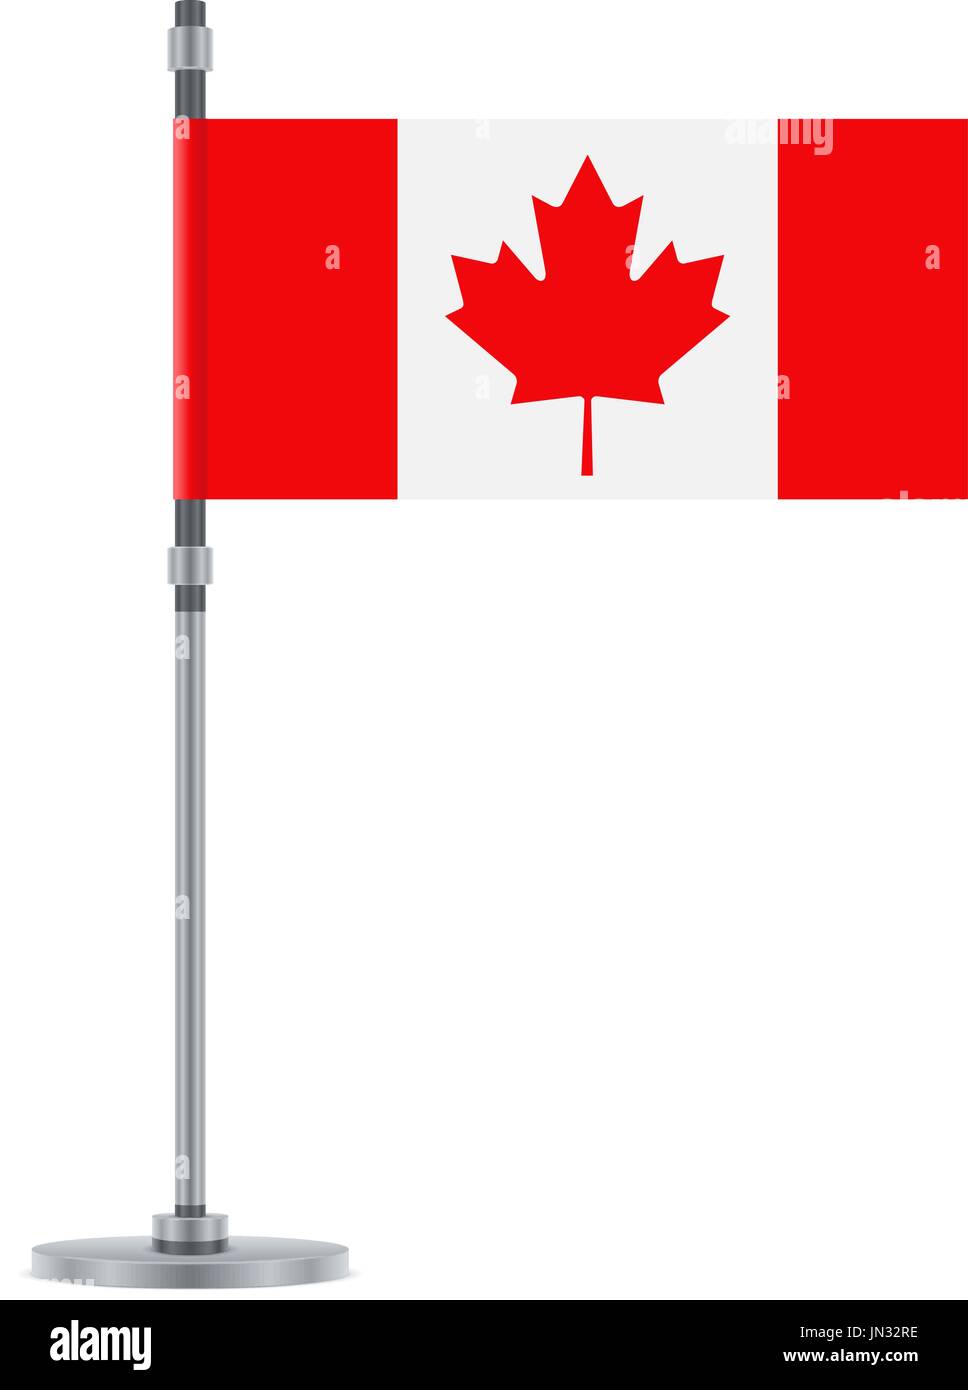 Flag design. Canadian flag on the metallic pole. Isolated template for your designs. Vector illustration. Stock Vector